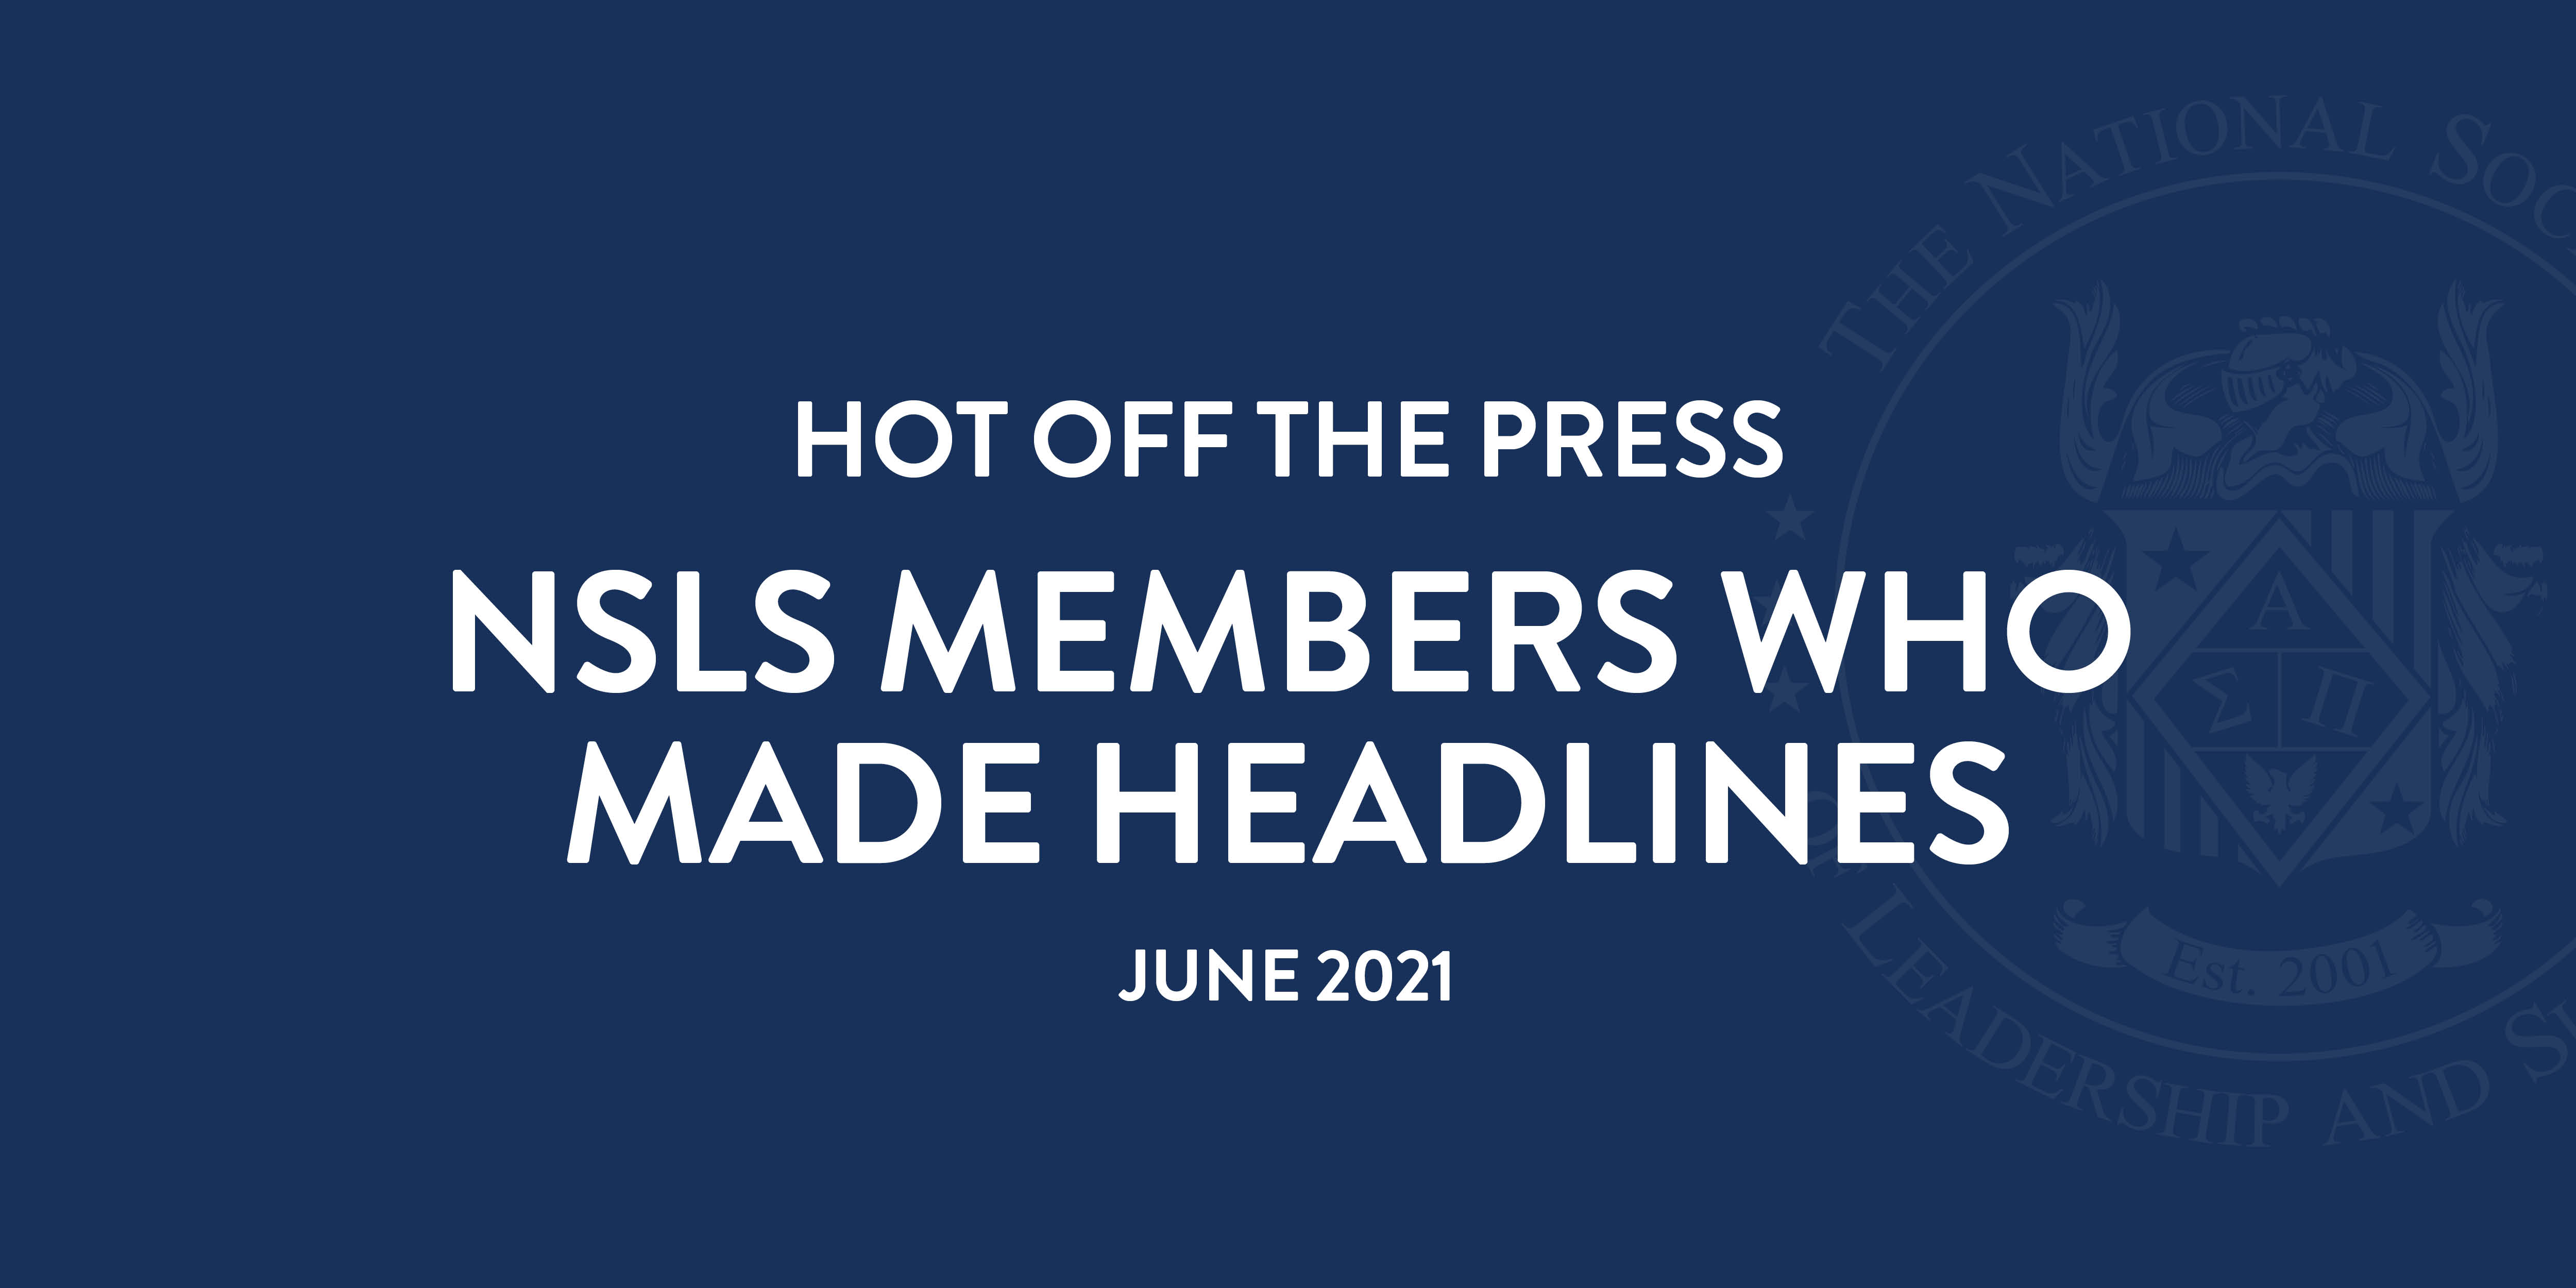 Hot Off the Press: NSLS Members Who Made Headlines in June 2021